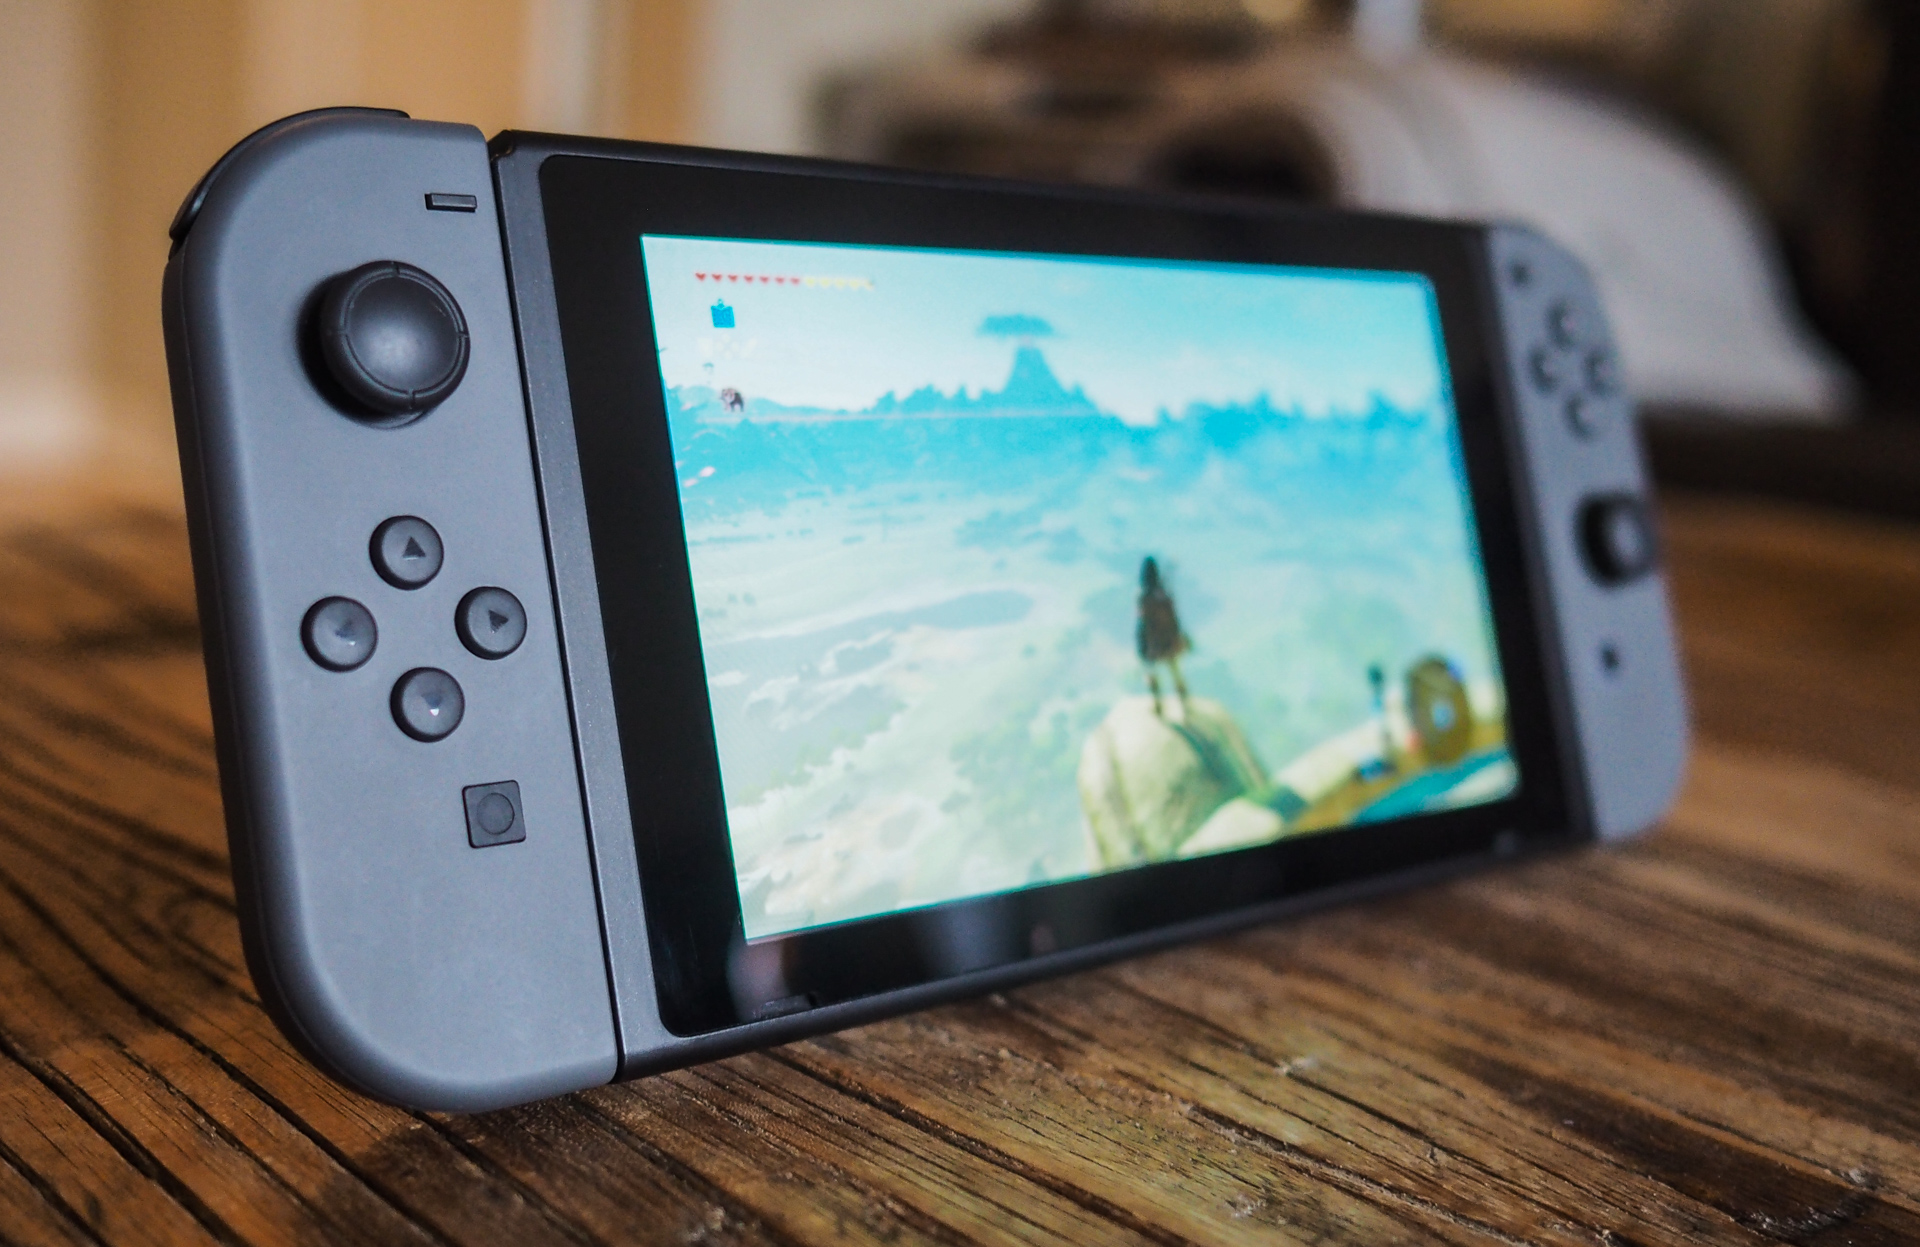 Nintendo says Switch will beat Wii U total sales within its first year